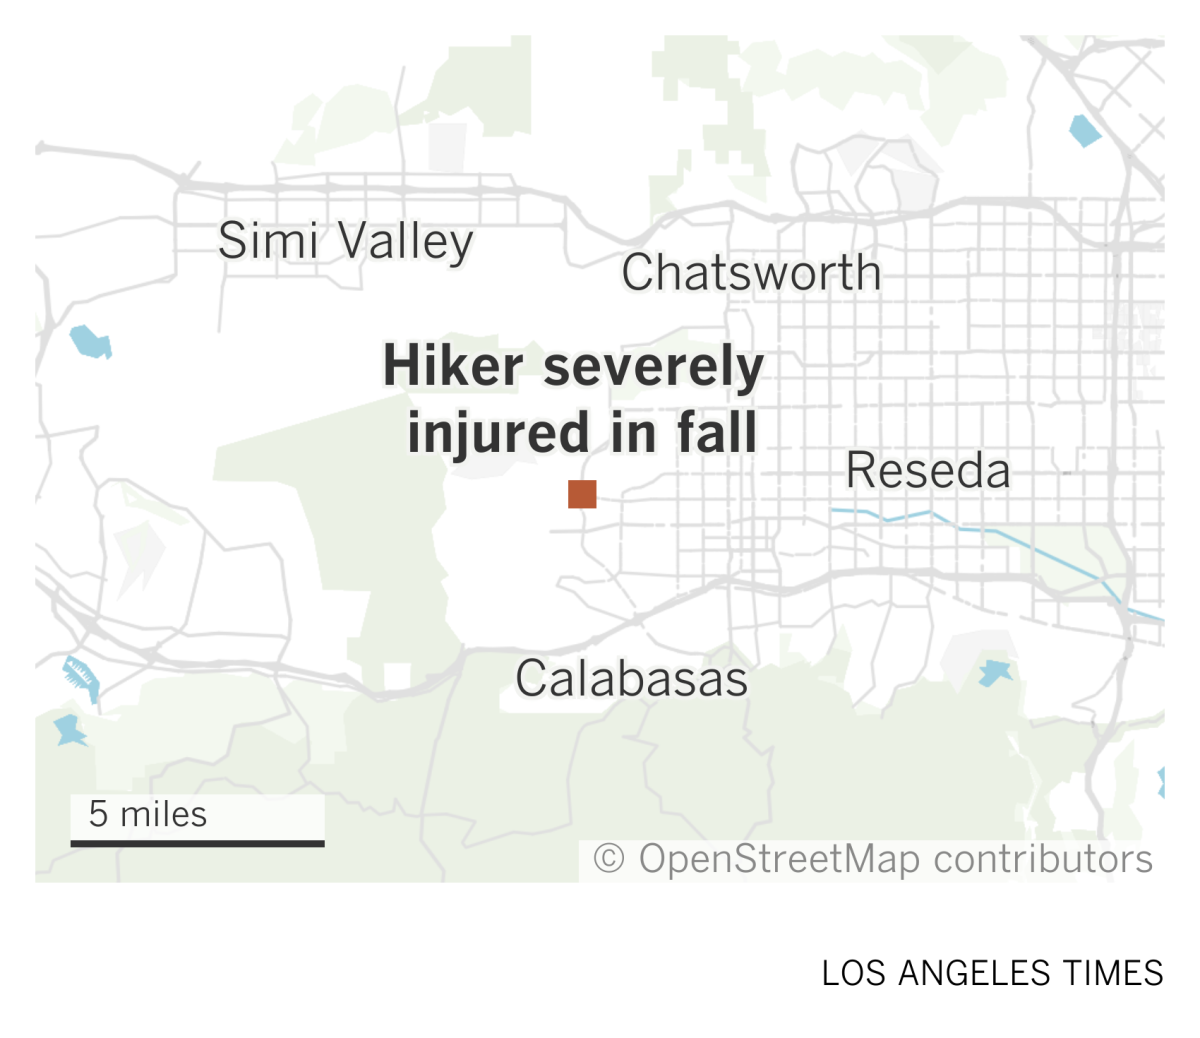 A map of the west San Fernando Valley showing where a hiker was severely injured in a fall in West Hills